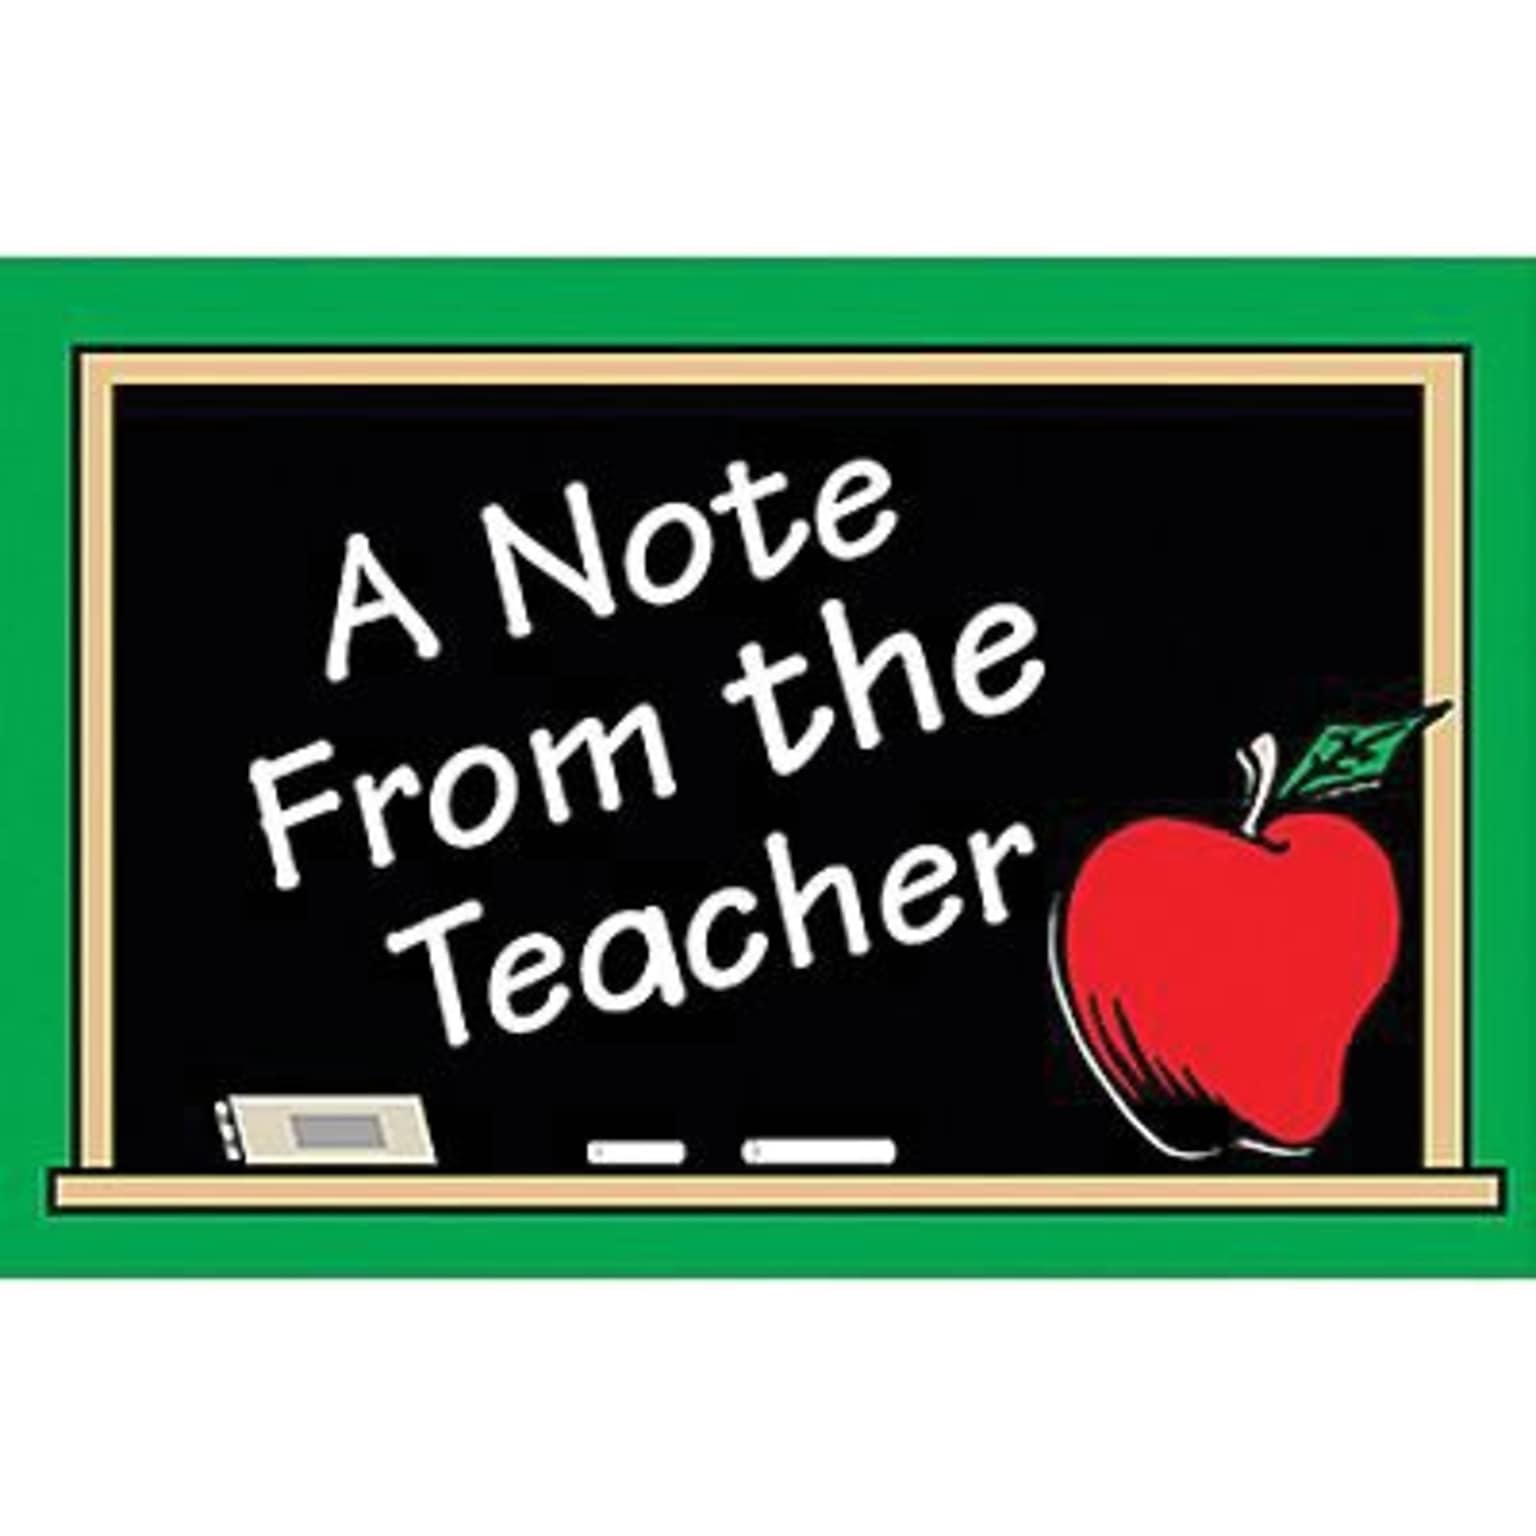 A Note from the Teacher Postcards